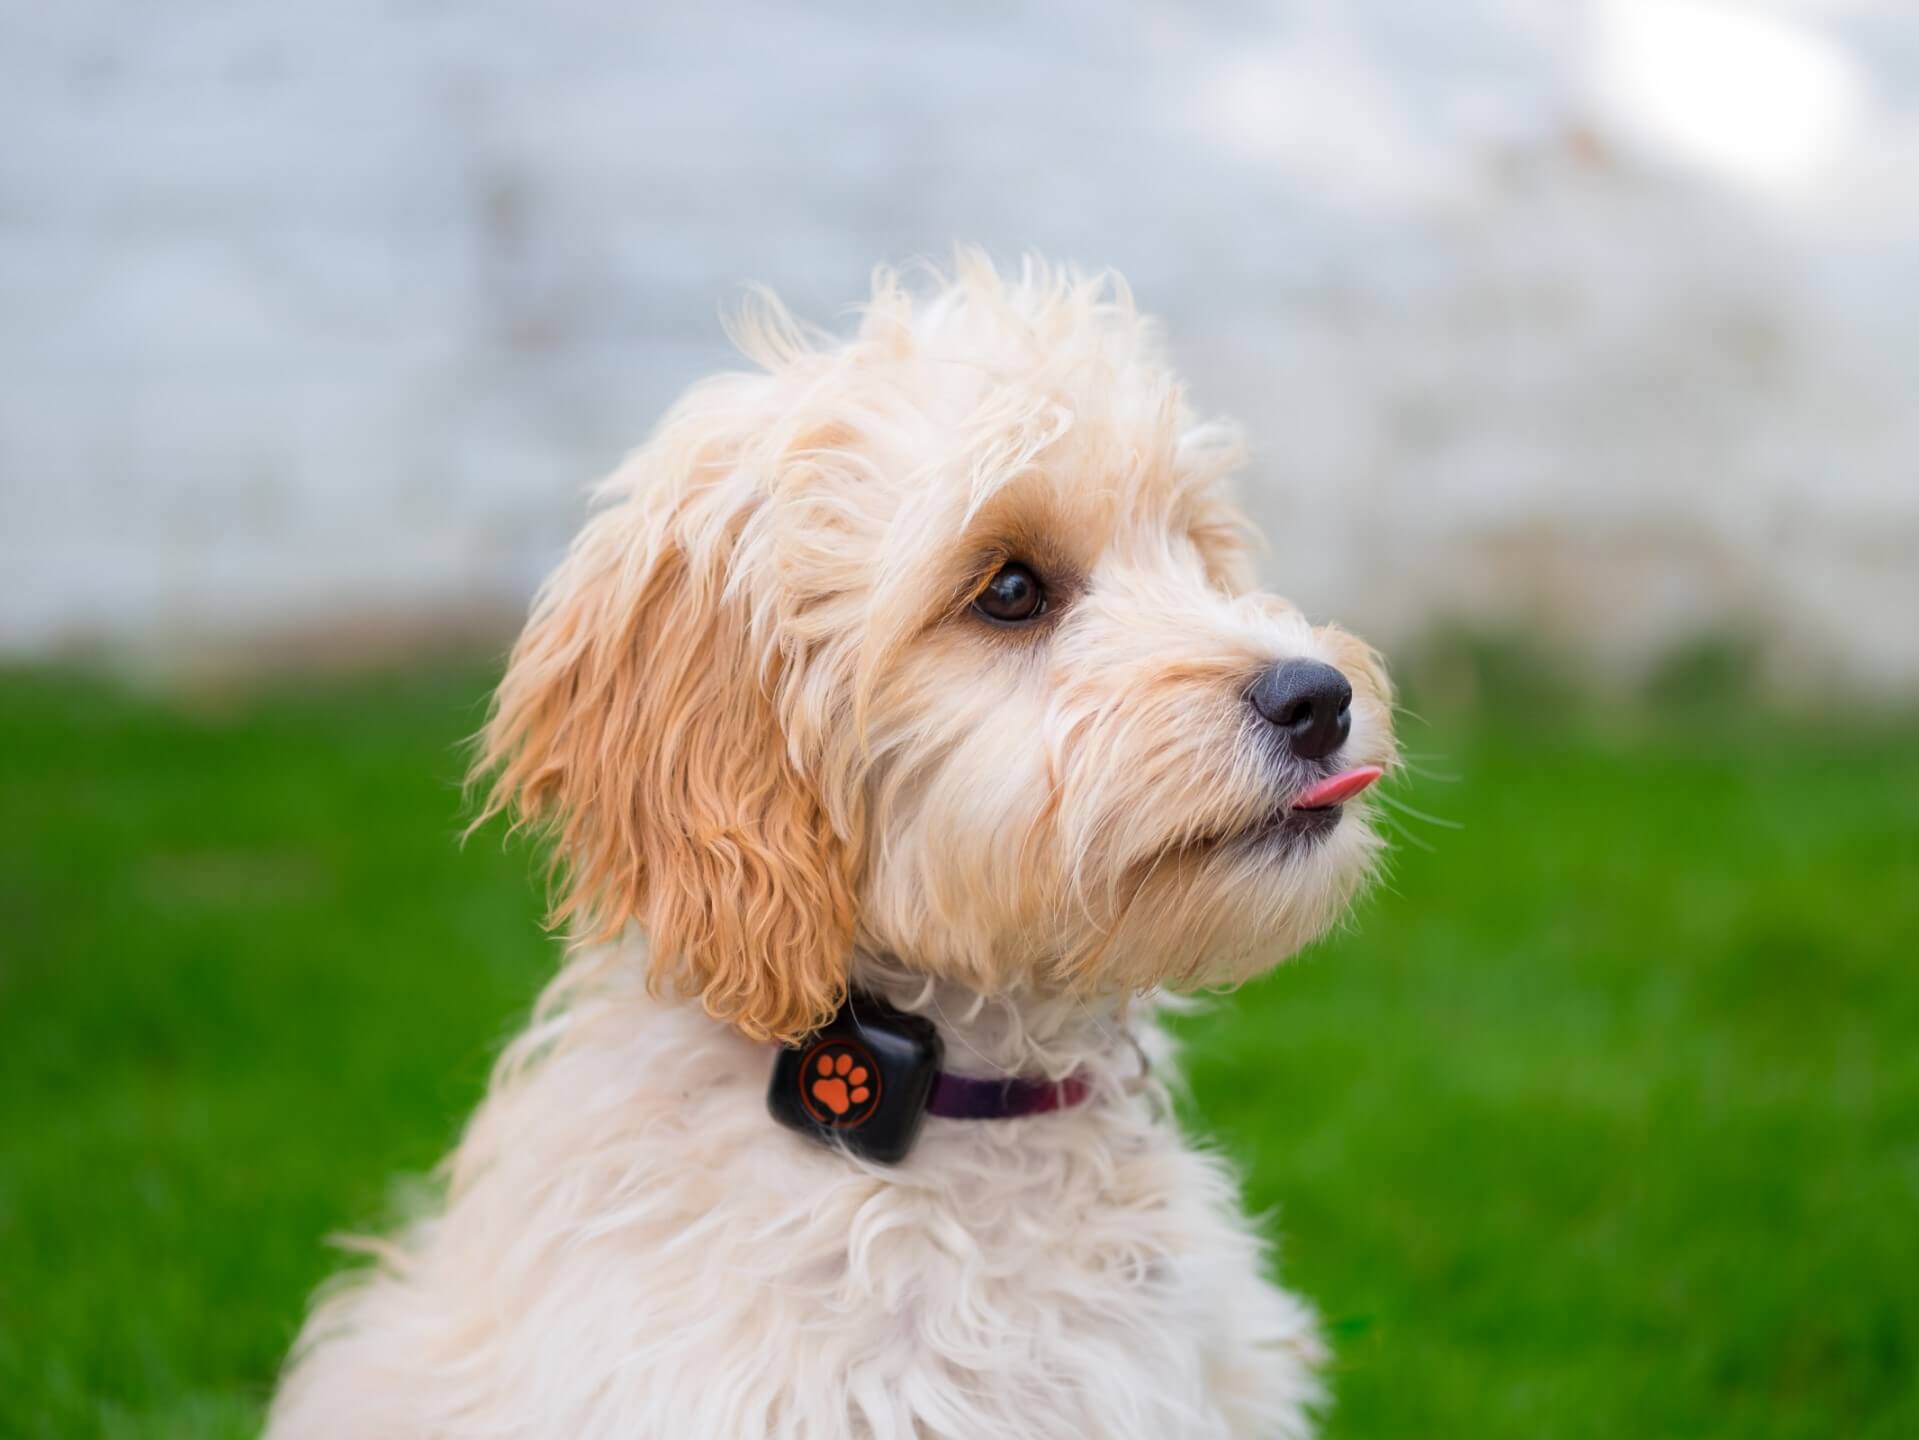 Cockapoo puppy with tongue sticking out wearing a PitPat Dog Activity Monitor